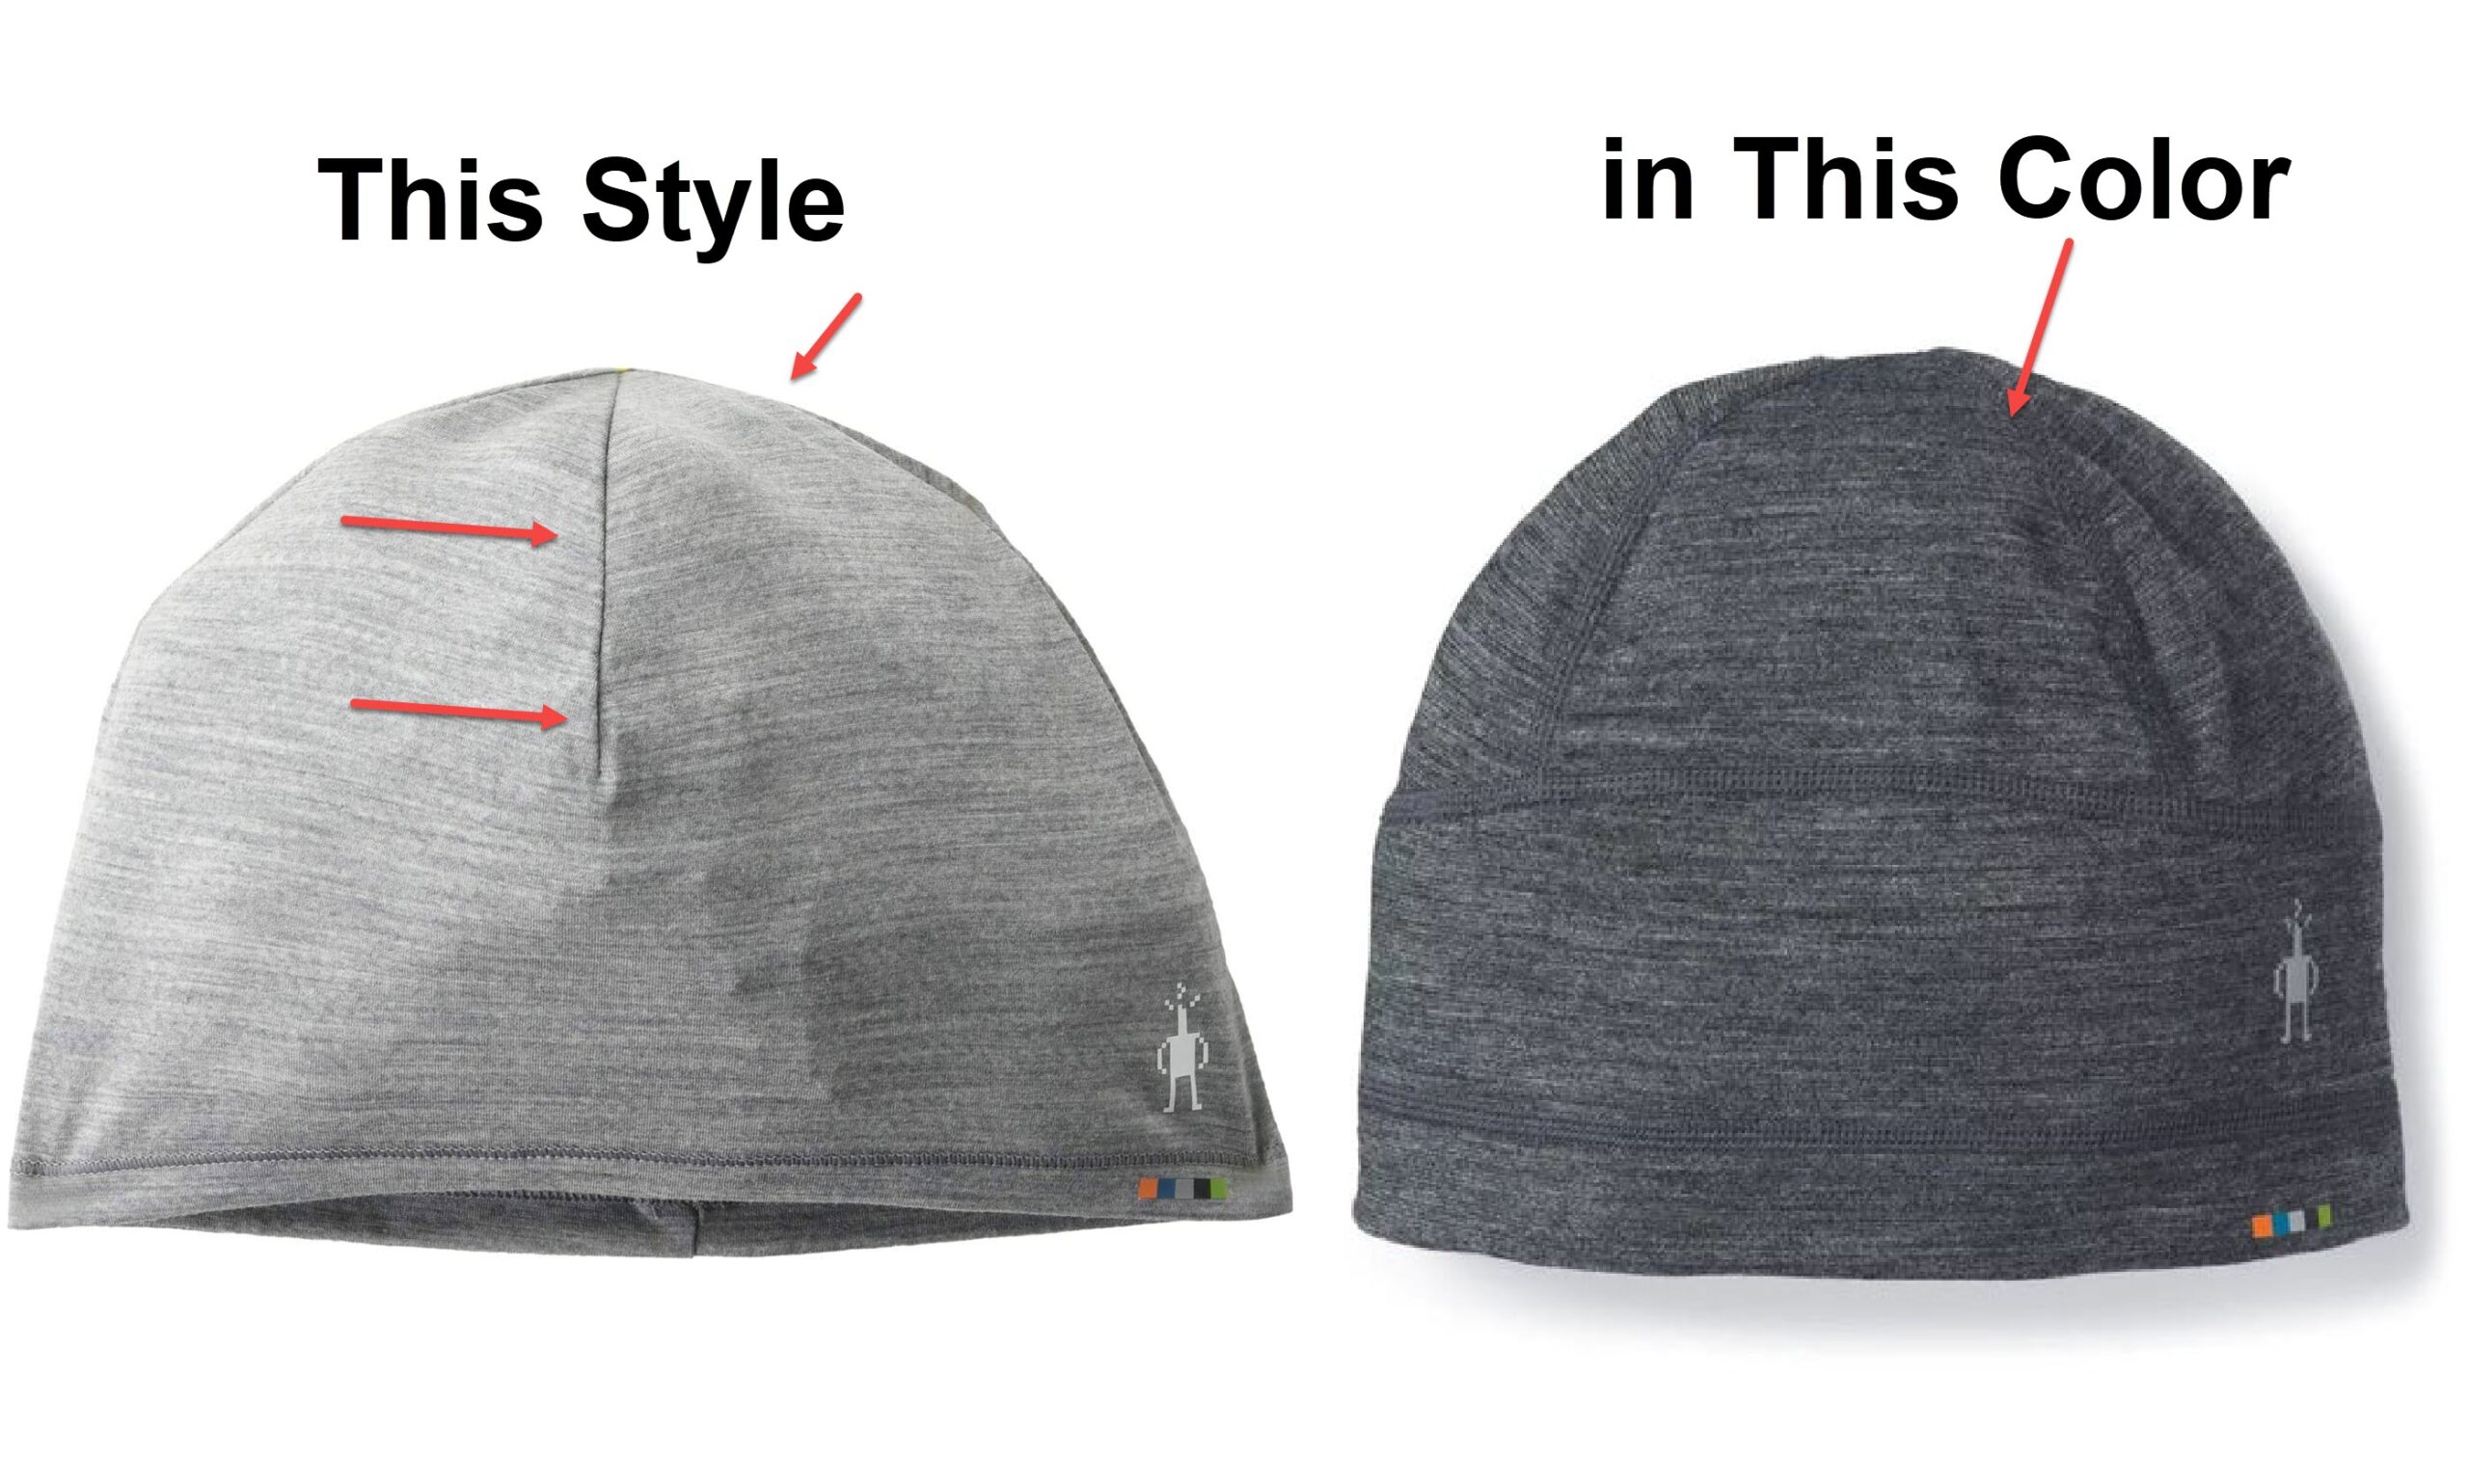 Old Style) Smart beanie 150 (gray) Light - Backpacking Wool